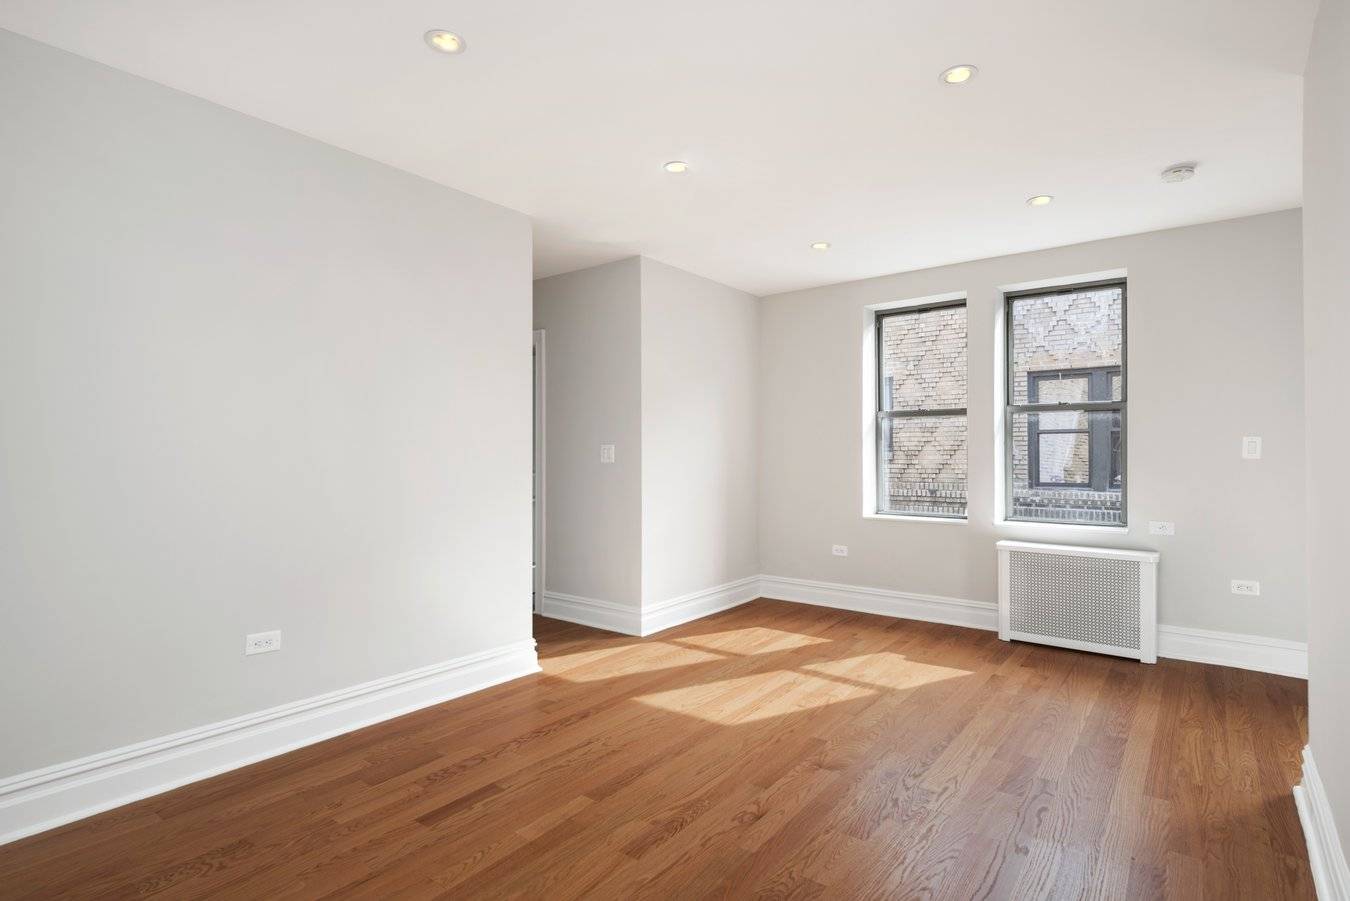 Modern, gut renovated two bedroom, one bath apartment featuring new oak hardwood floors, a large living room, separate kitchen with Quartz counter tops, stainless steel appliances and a glass tiled ...